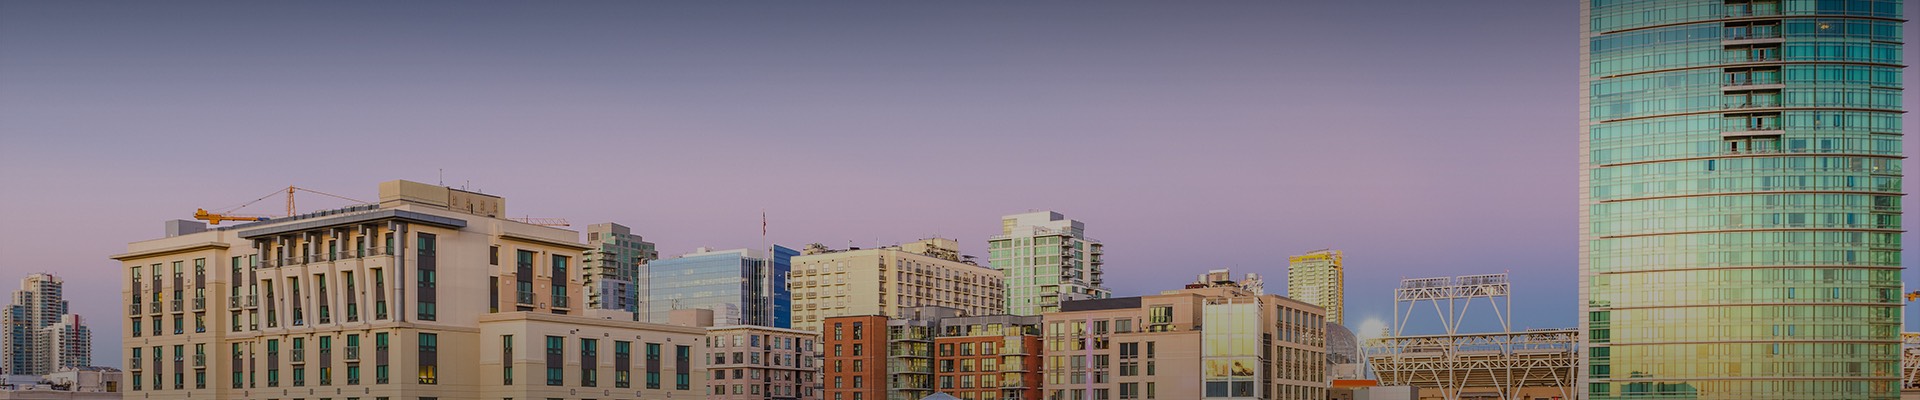 partial view of san diego buildings